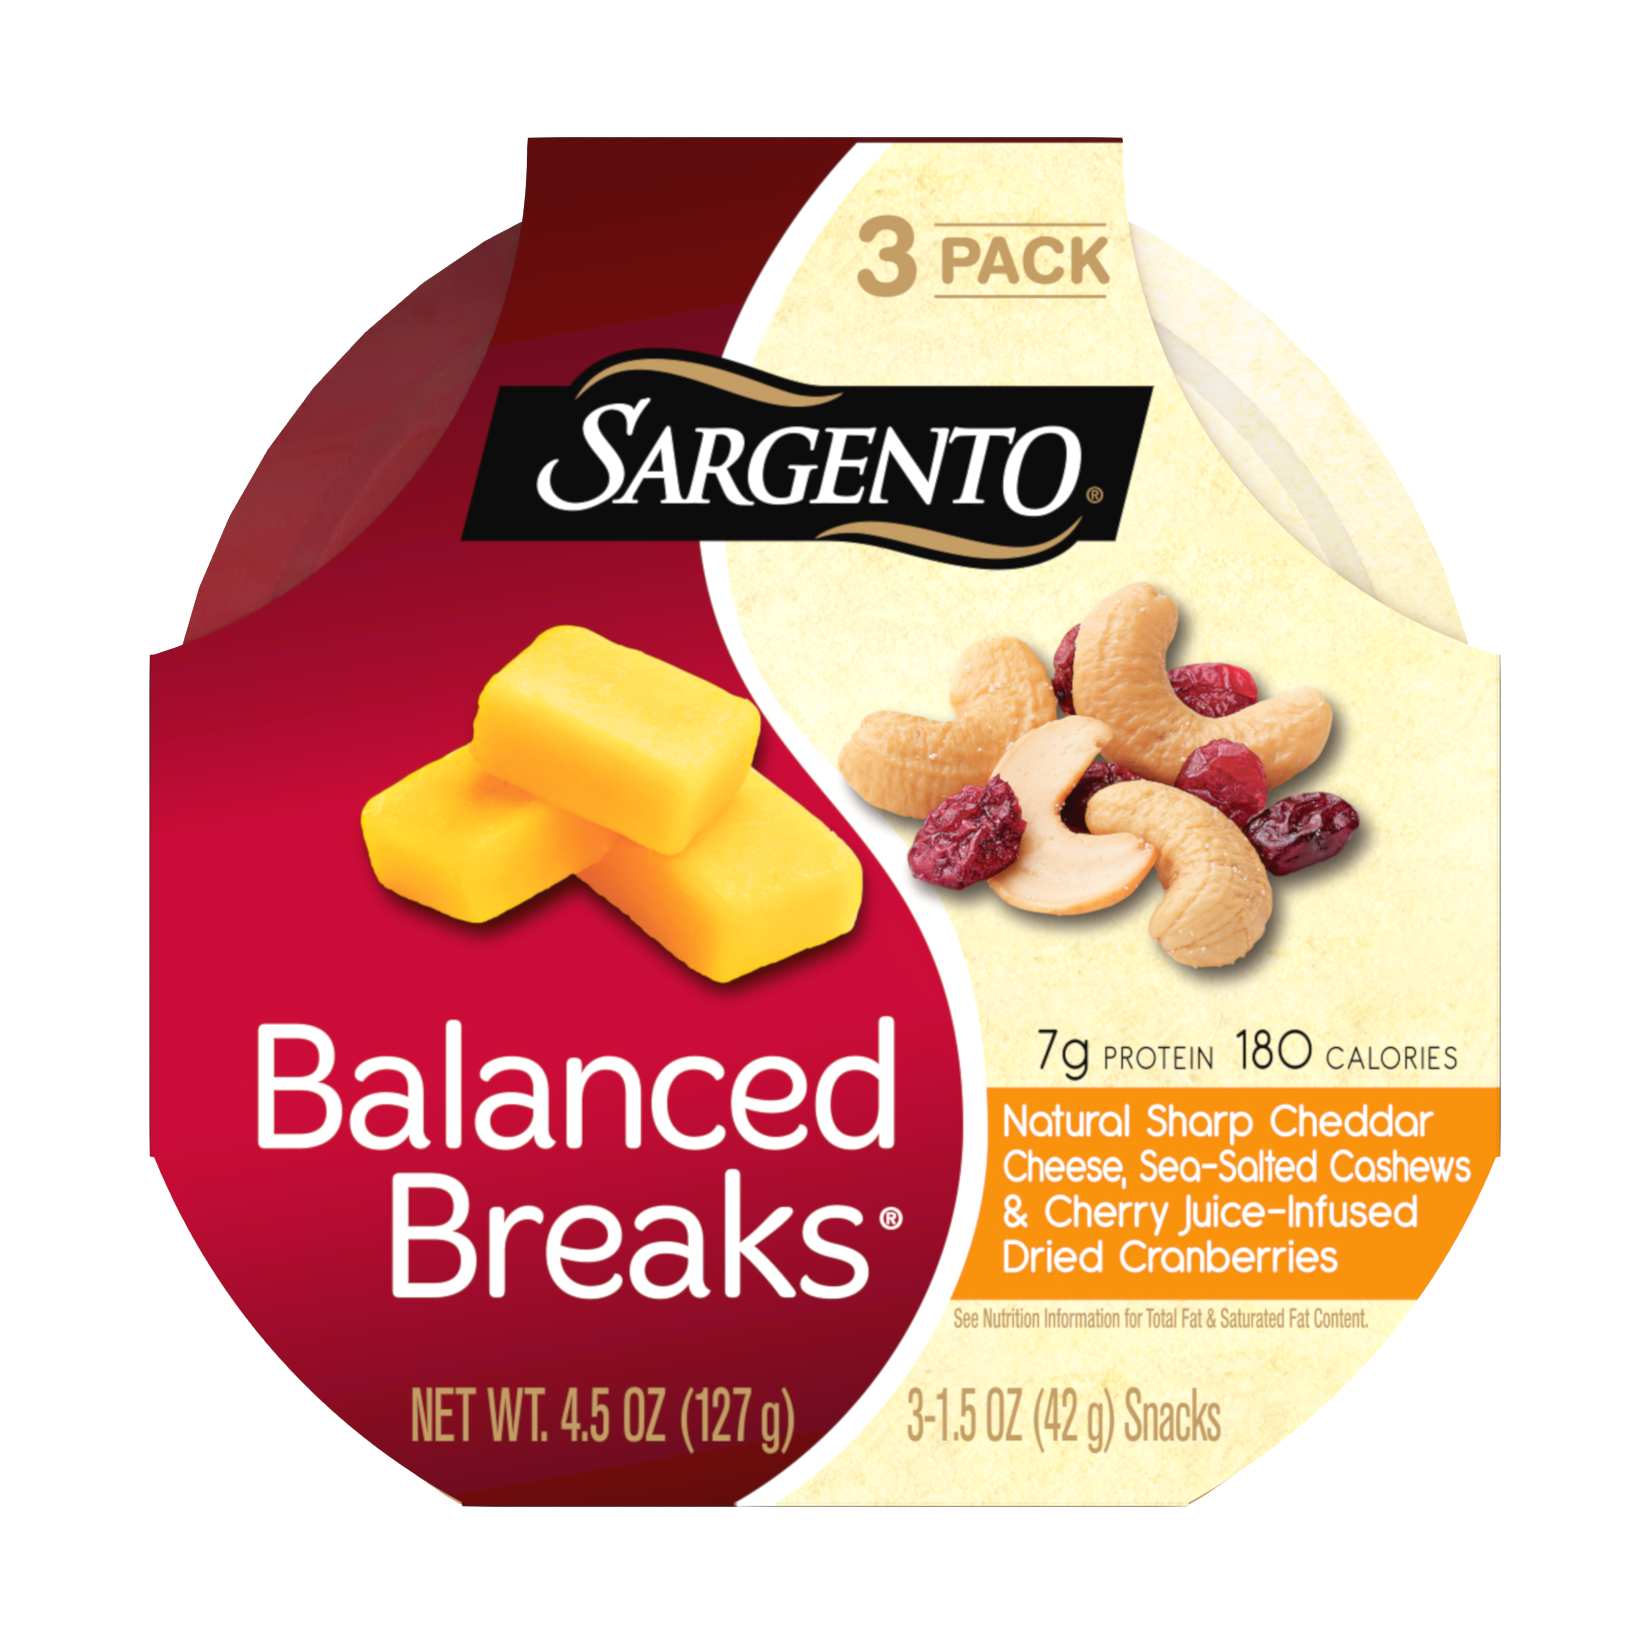 Sargento® Balanced Breaks®, Natural Sharp Cheddar Cheese, Sea-Salted Cashews and Cherry Juice-Infused Dried Cranberries